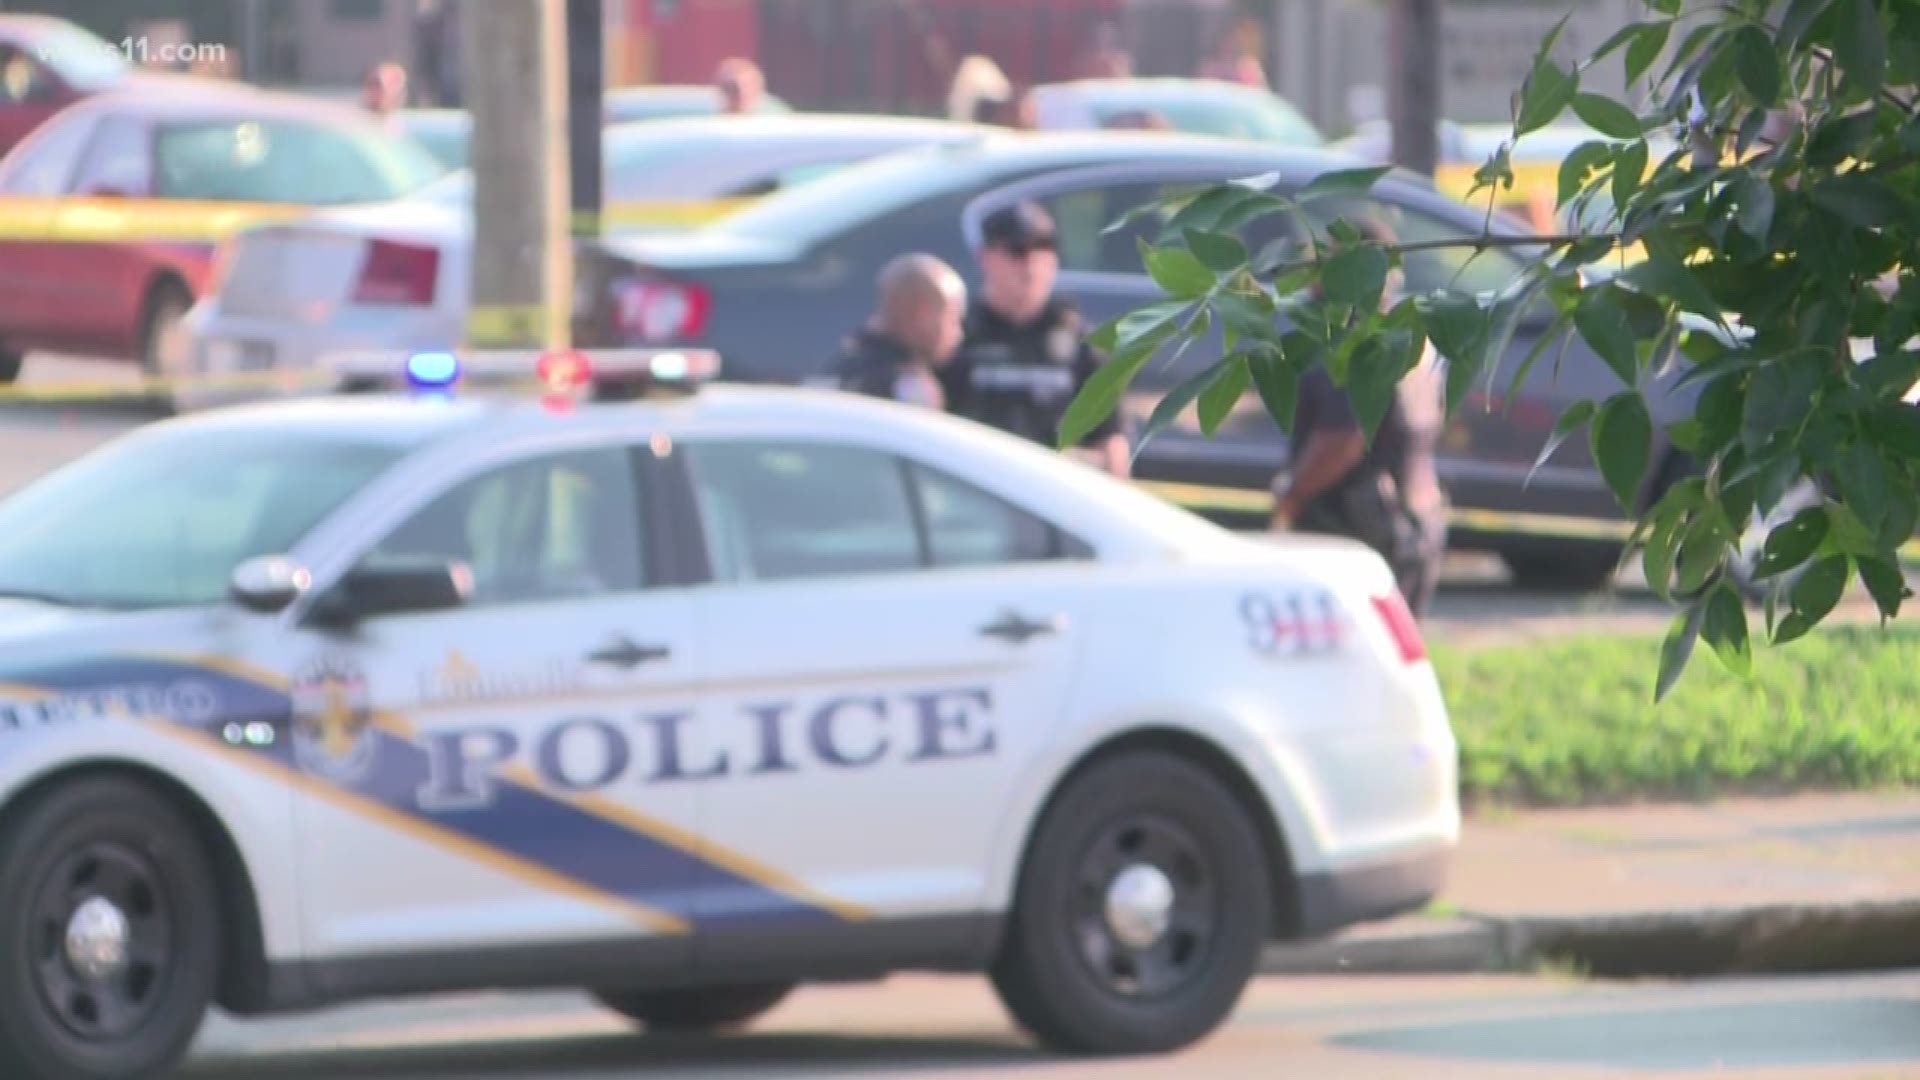 Police are searching for a suspect after a victim was gunned down in southwest Louisville on June 8.